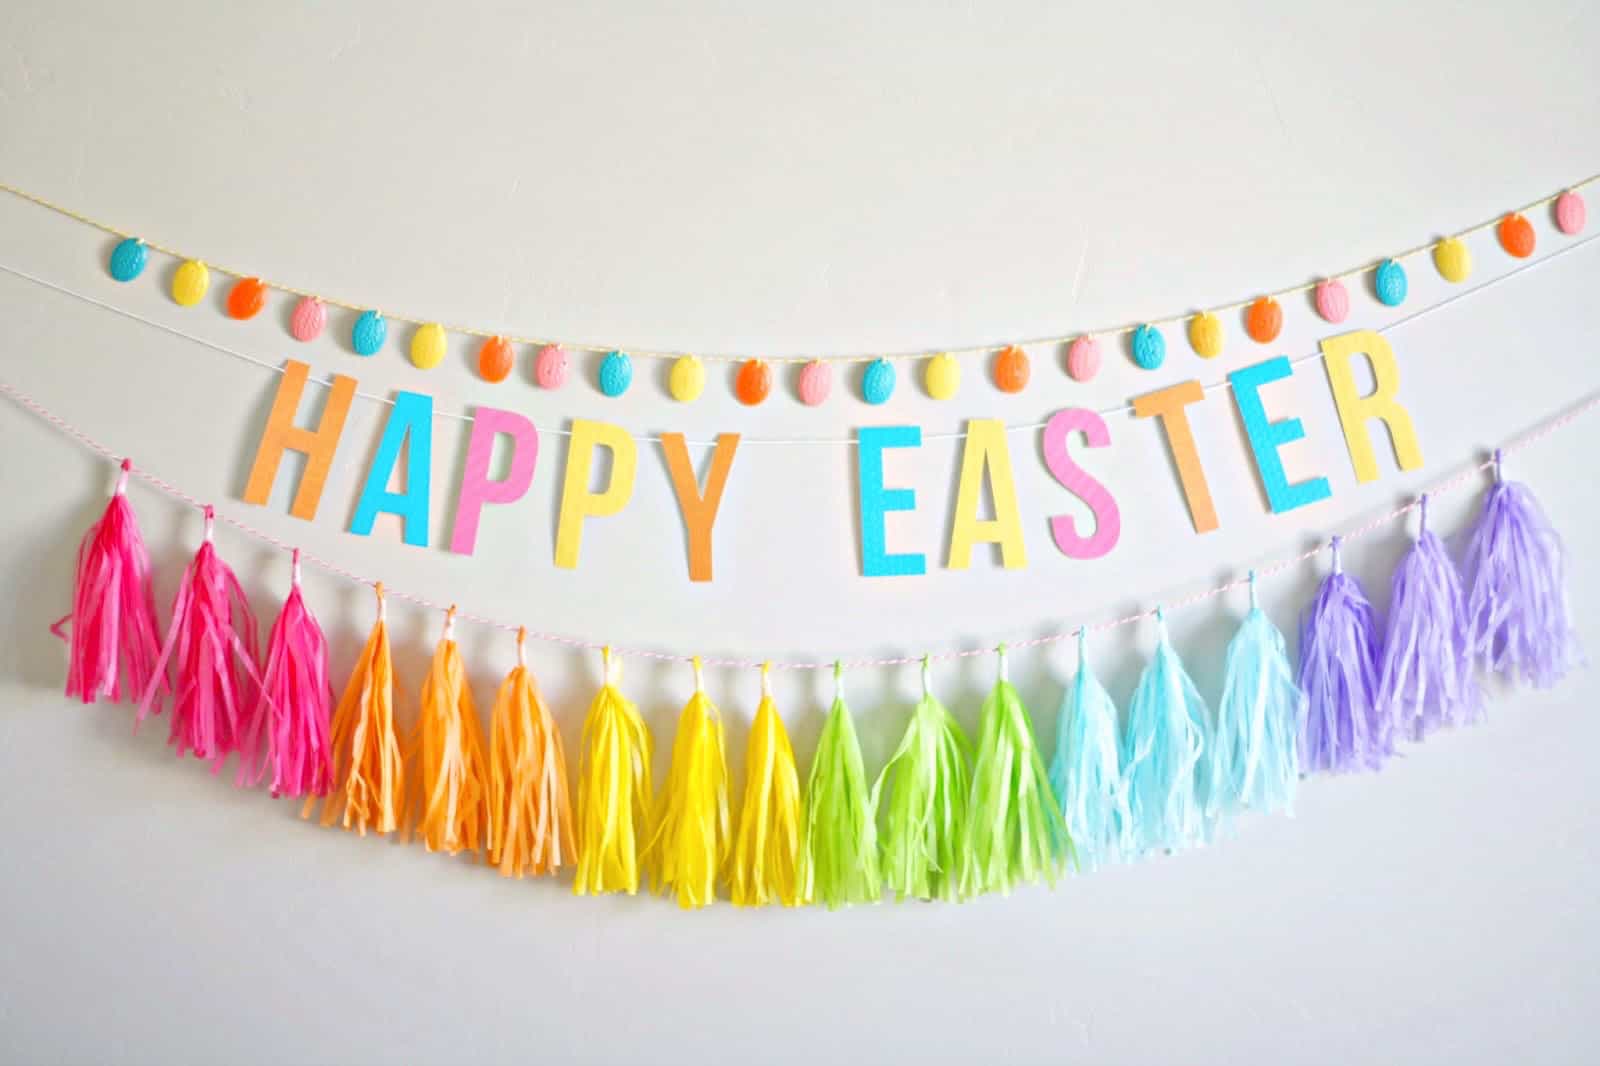 Learn how to make a simple and colorful DIY egg garland using Mod Molds and Melts. This is such a fun and easy Easter craft idea! Customize for any holiday.